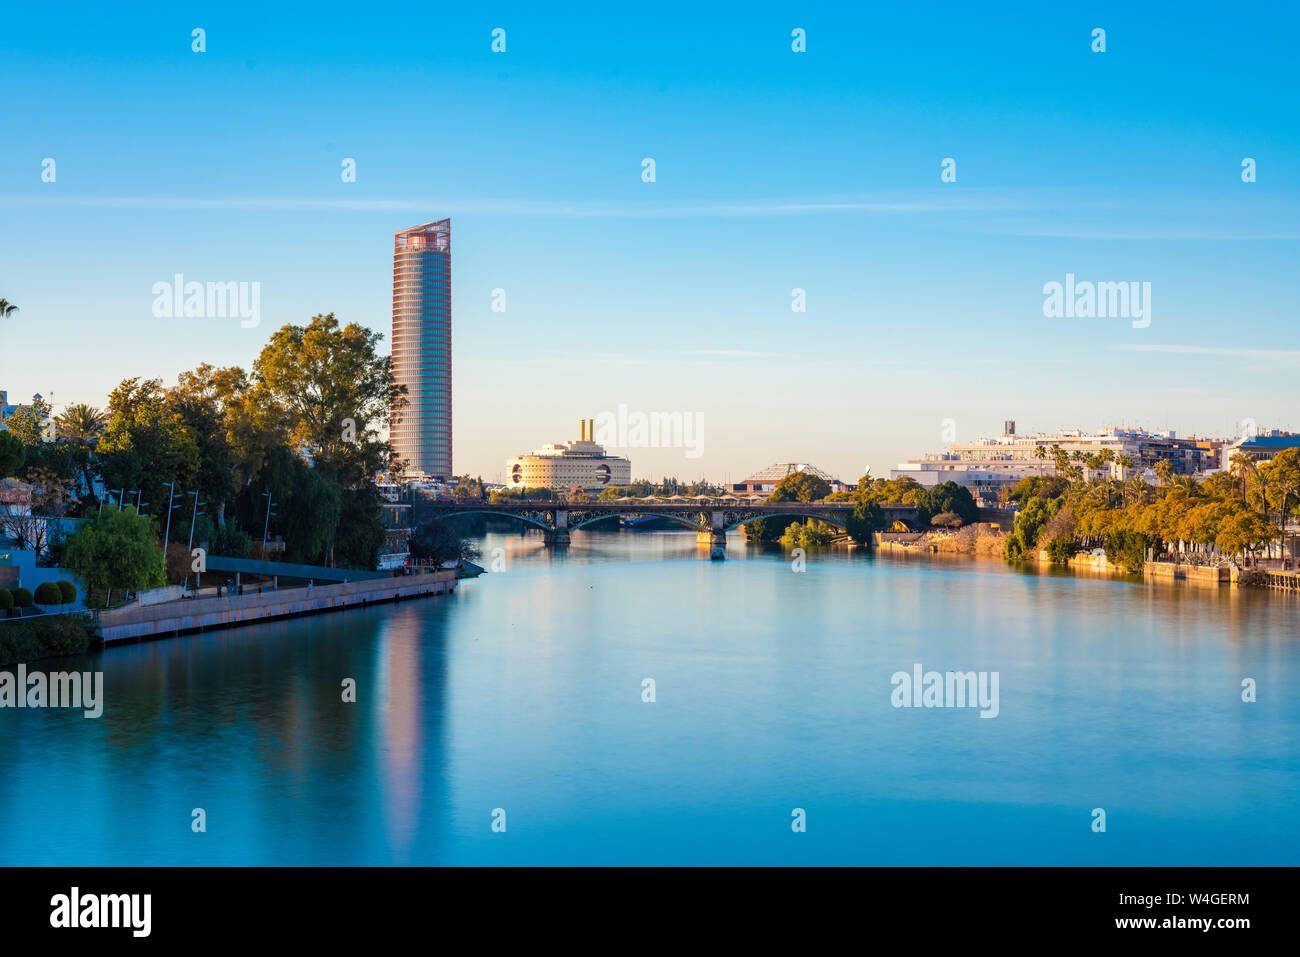 Long exposure of Torre Sevilla and bridge crossing the Canal de Alfonso XIII, Seville, Spain Stock Photo